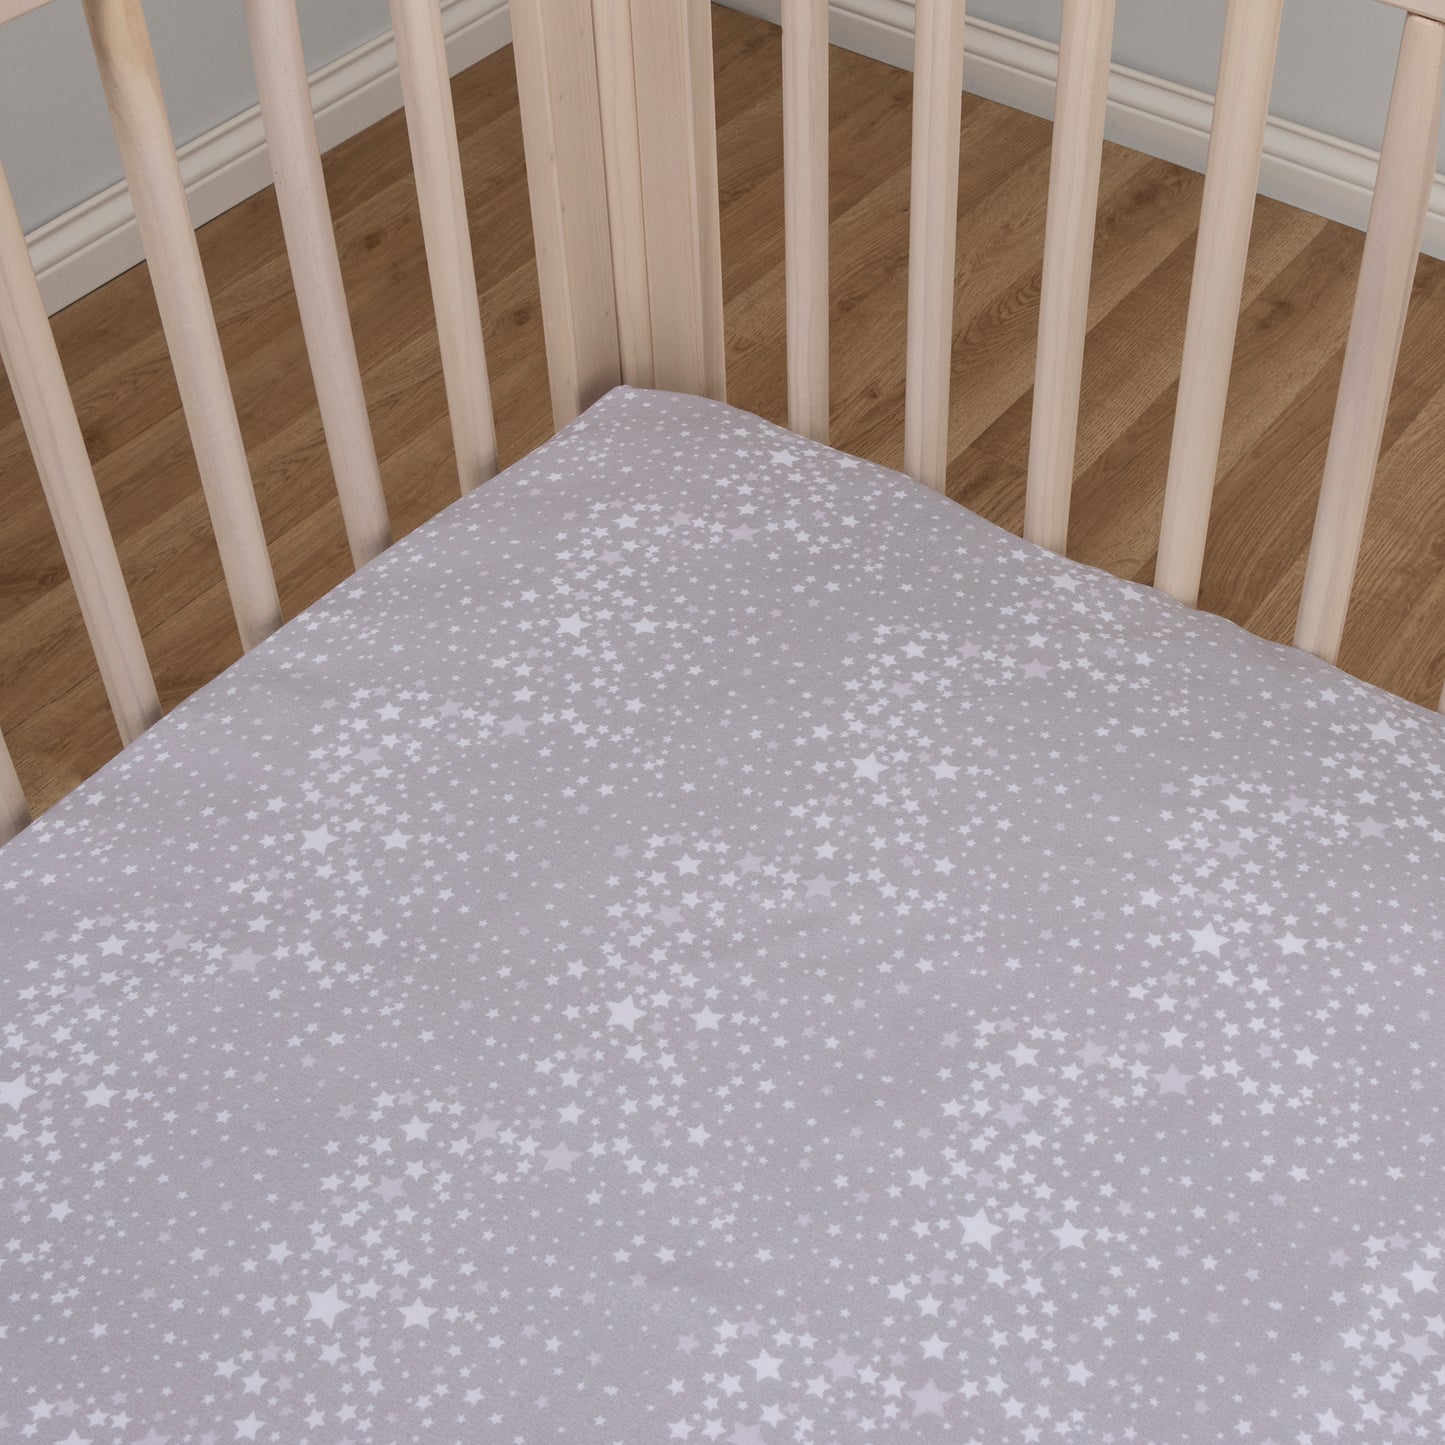 Starry Dreams 2-Pack Microfiber Fitted Crib Sheet Set by Sammy & Lou®